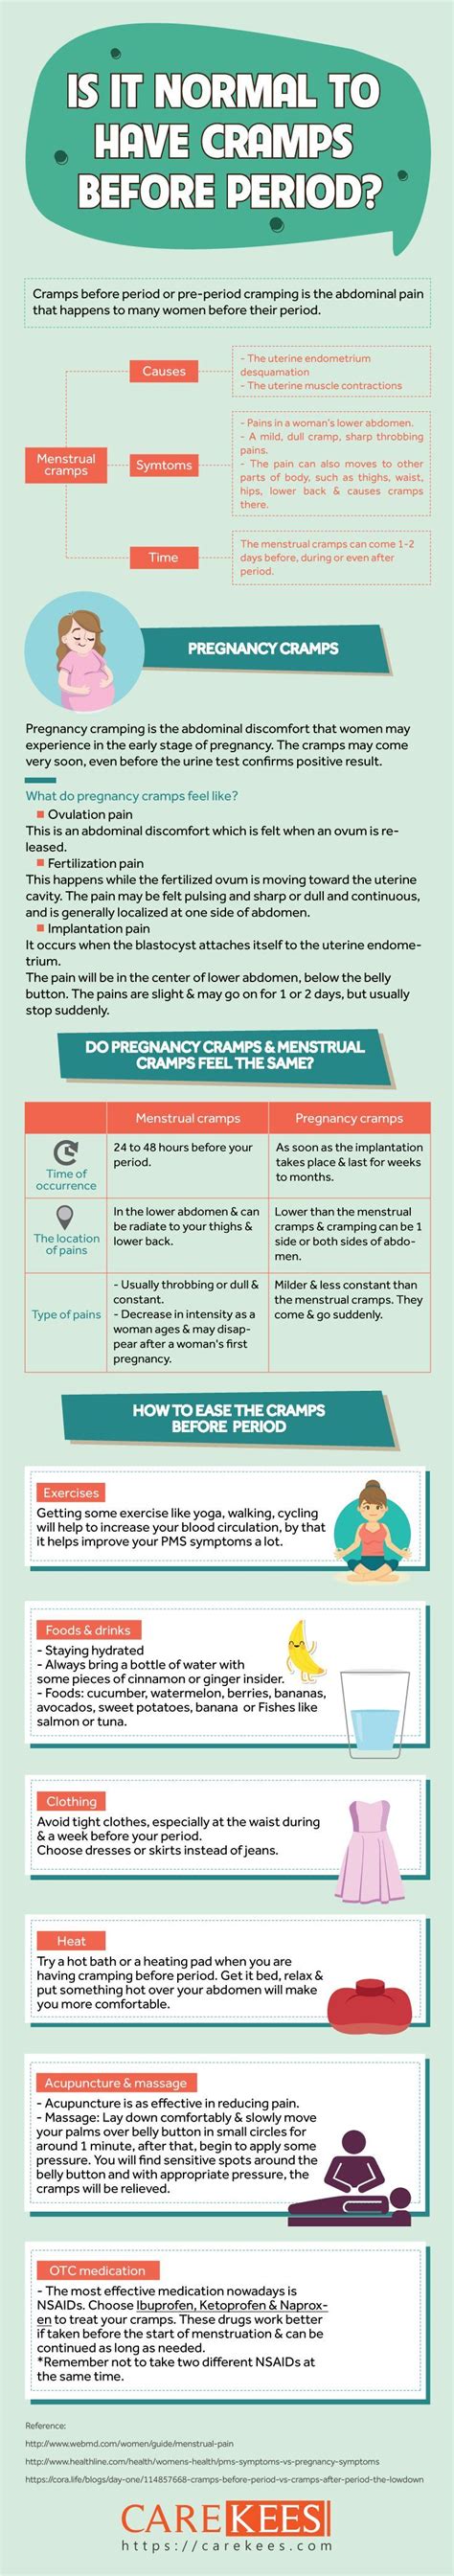 Is It Normal To Have Cramps Before Period Infographic Period Cramps Infographic Health Cramp